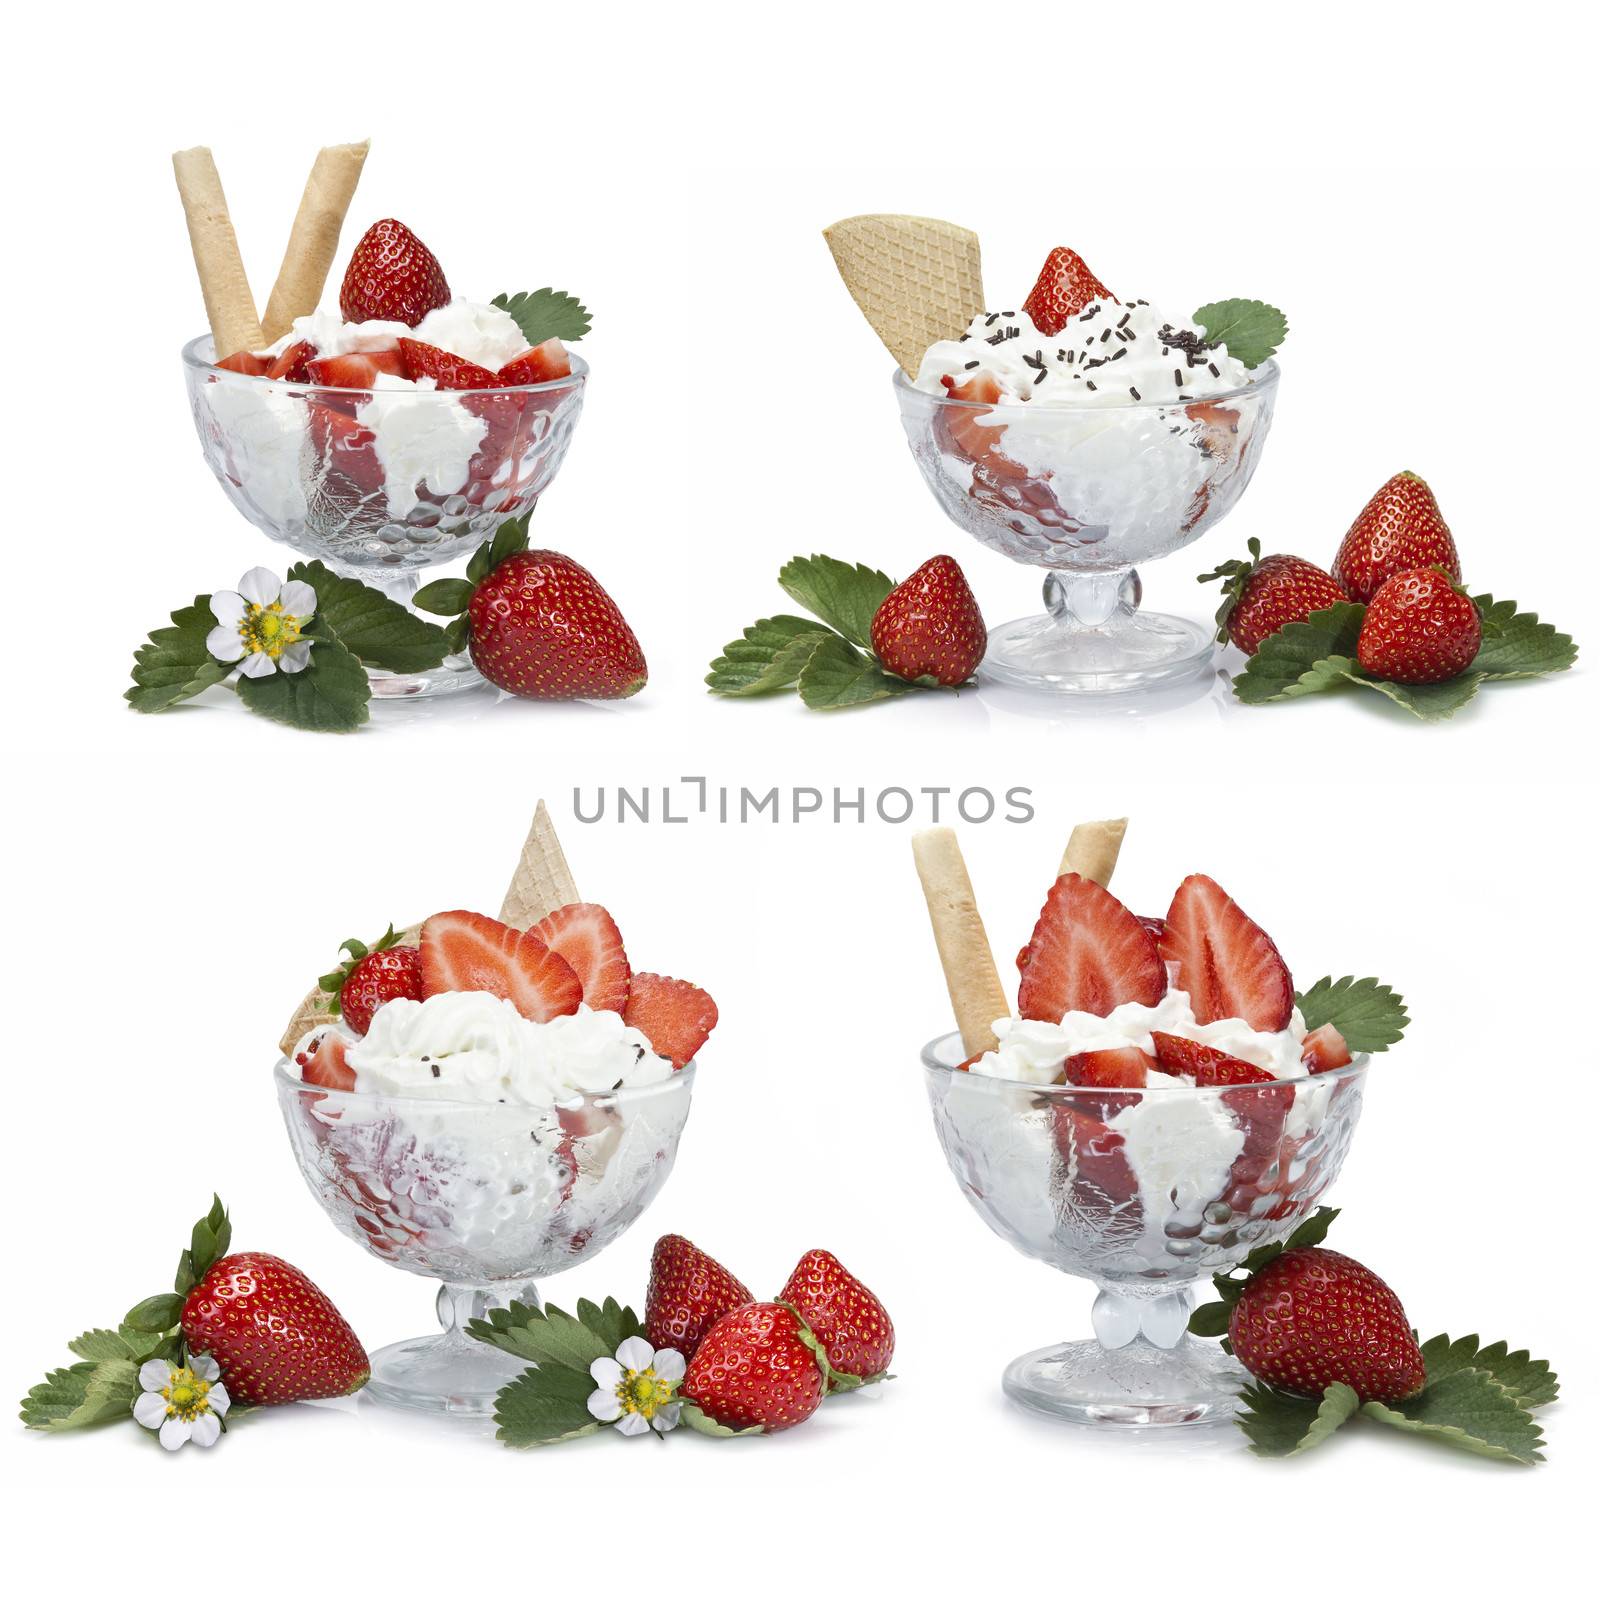 Four different presentations of strawberries with cream cups